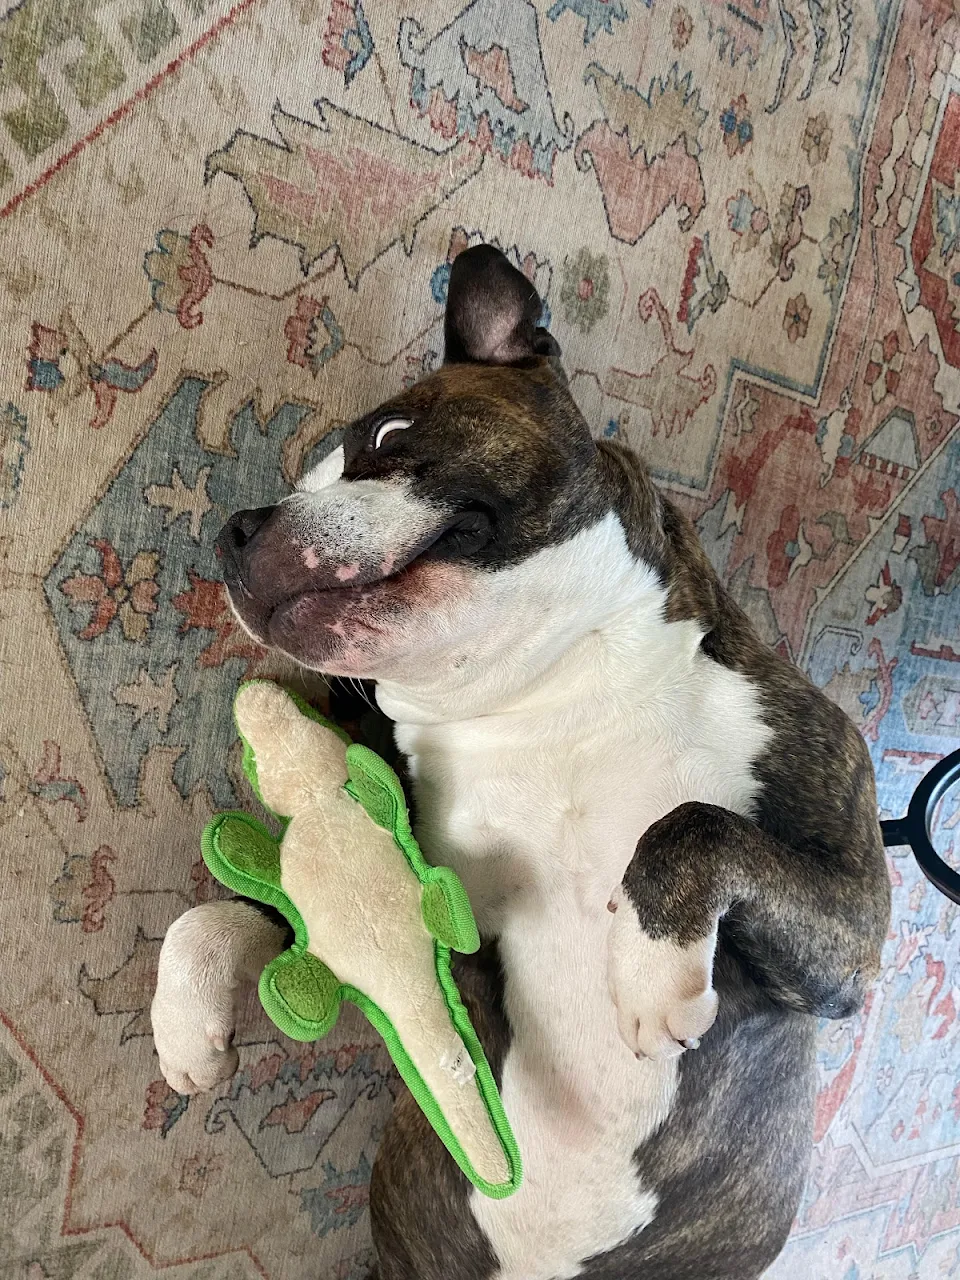 Just a derp & his gator.